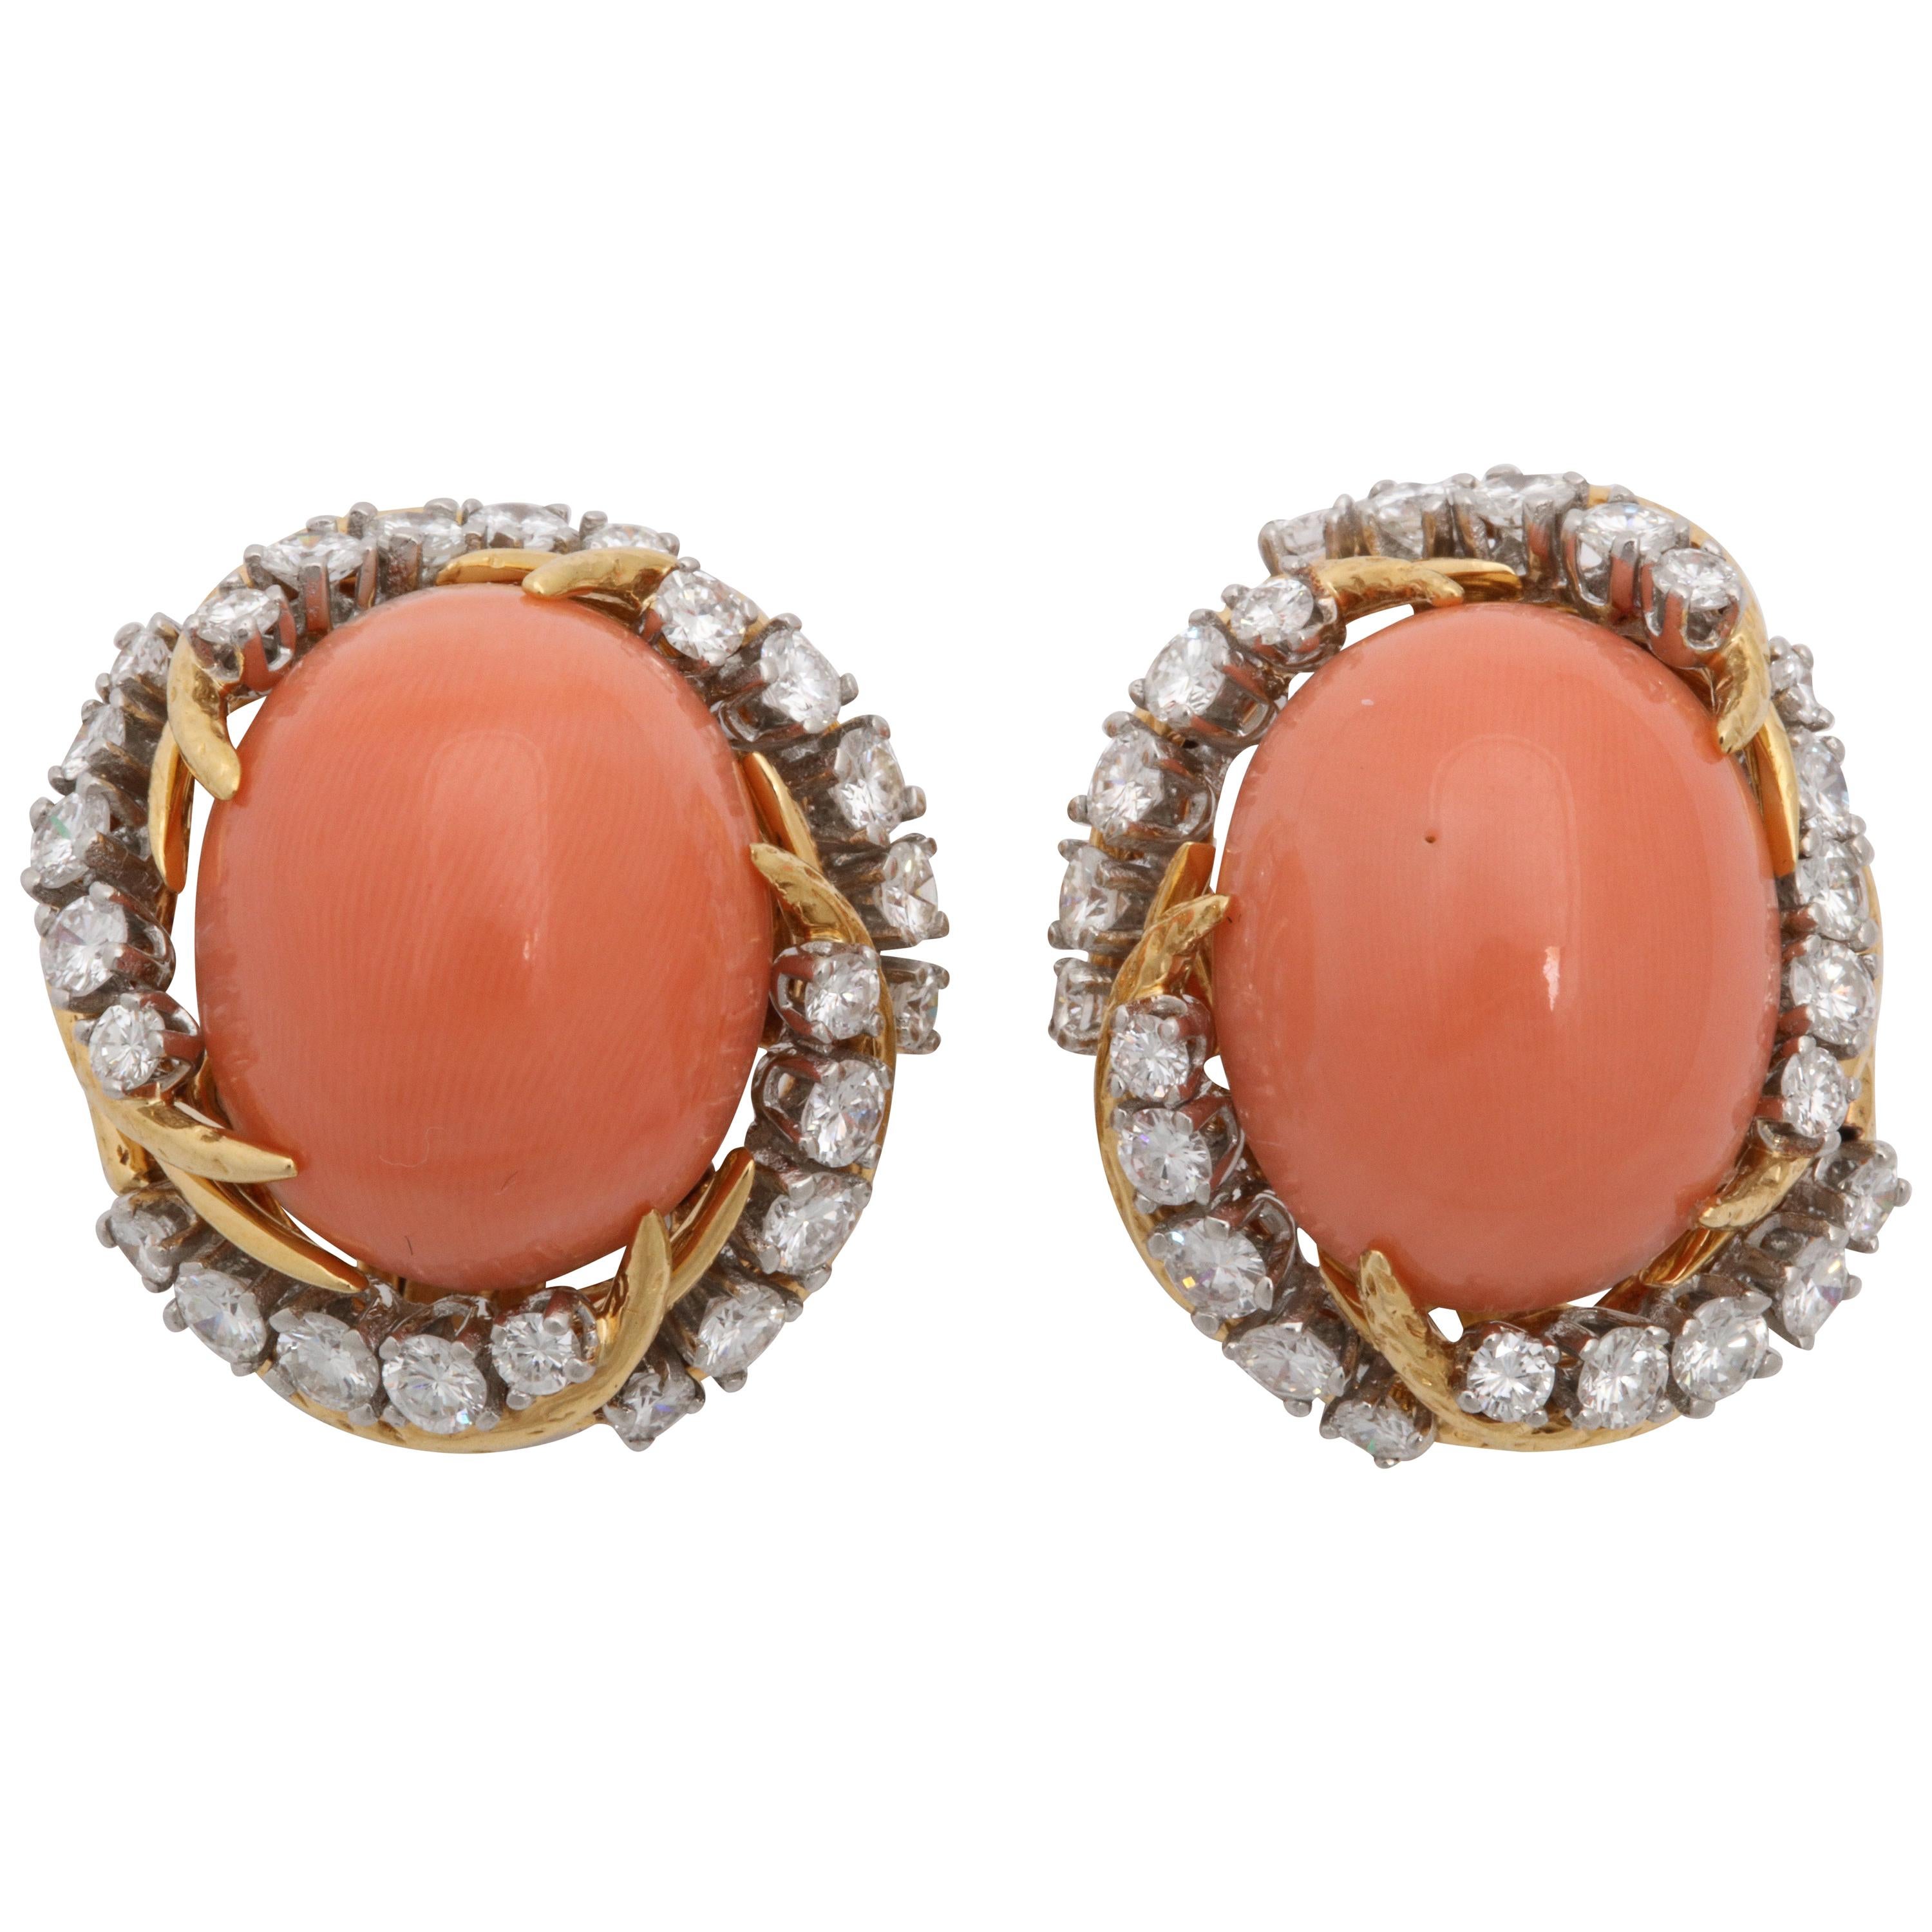 1960s, French, Oval Cabochon Coral with Diamonds Textured Gold Swirl Earclips